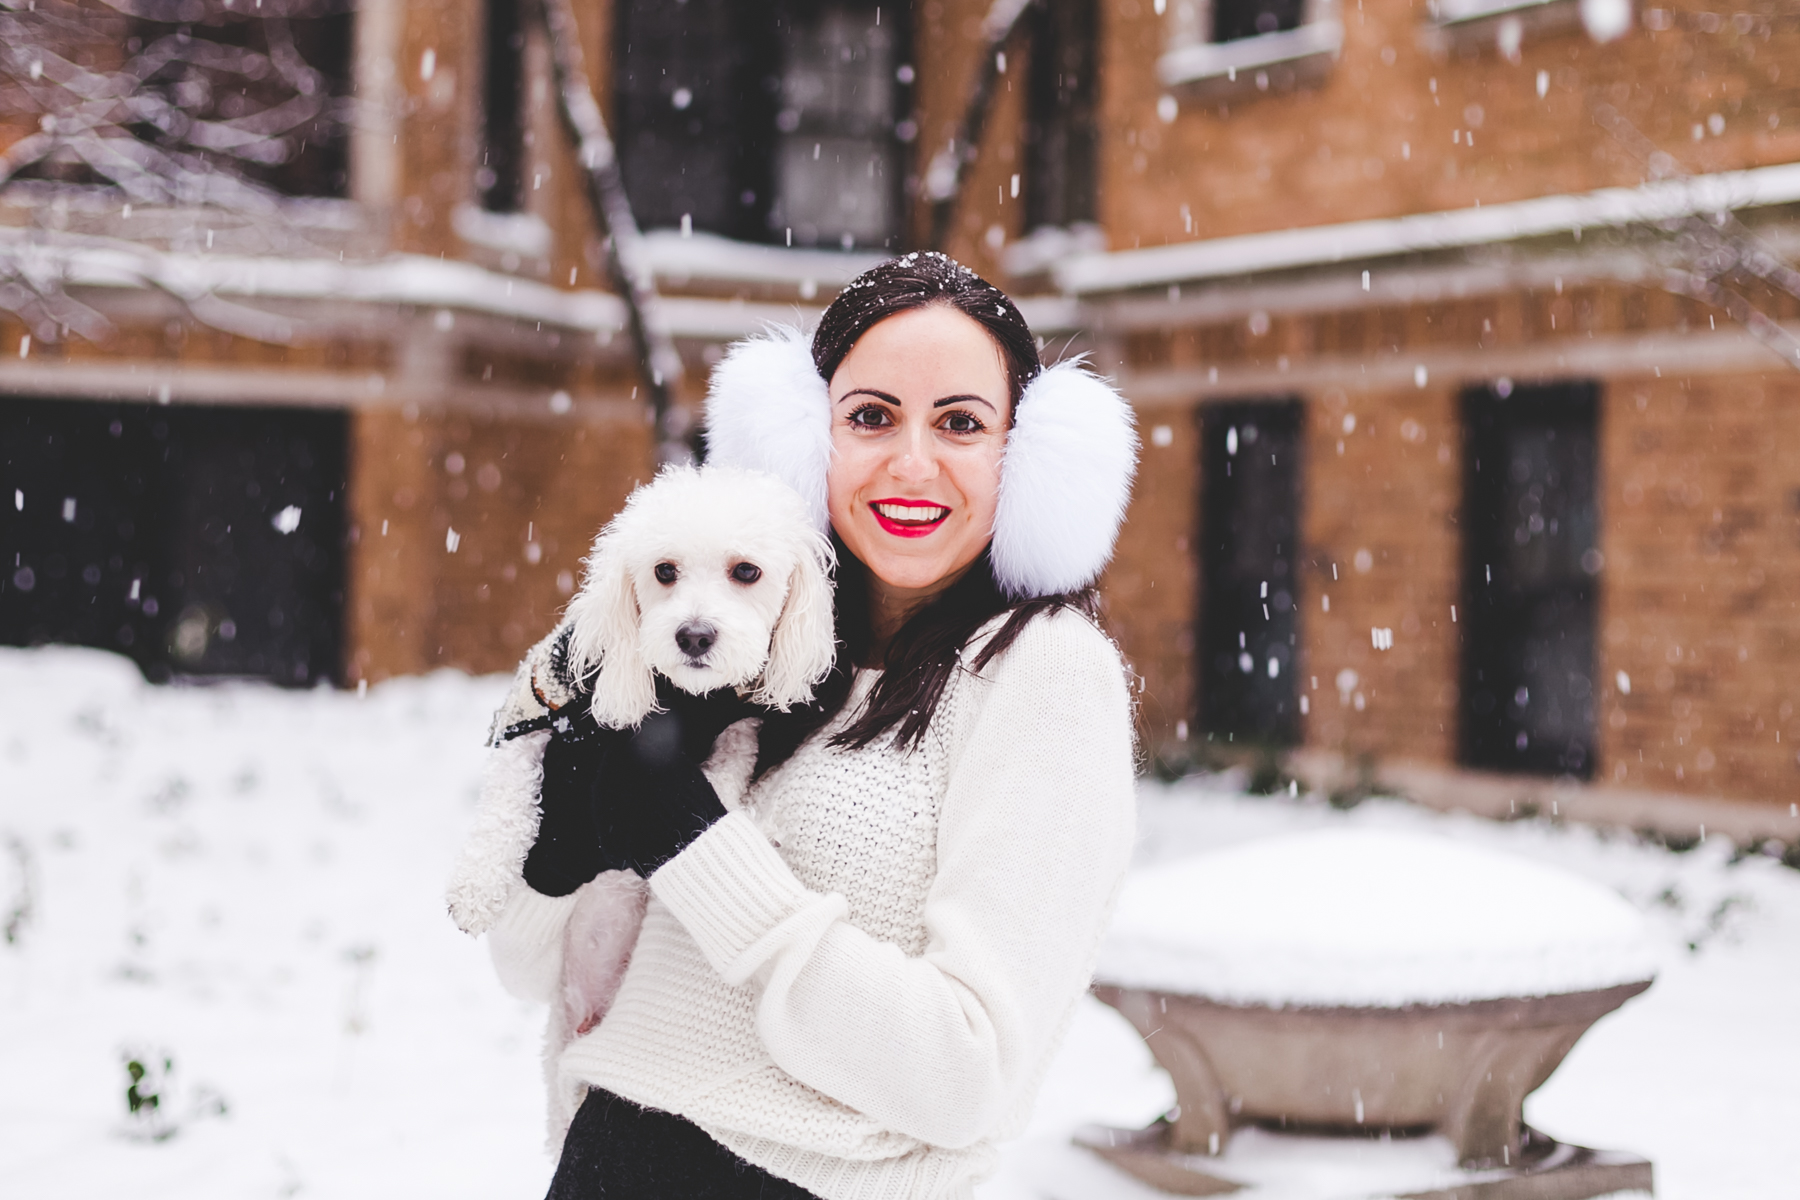 Yana Frigelis of NoMad Luxuries wearing fur earmuffs and a cozy cableknit sweater in the snow for the holidays 